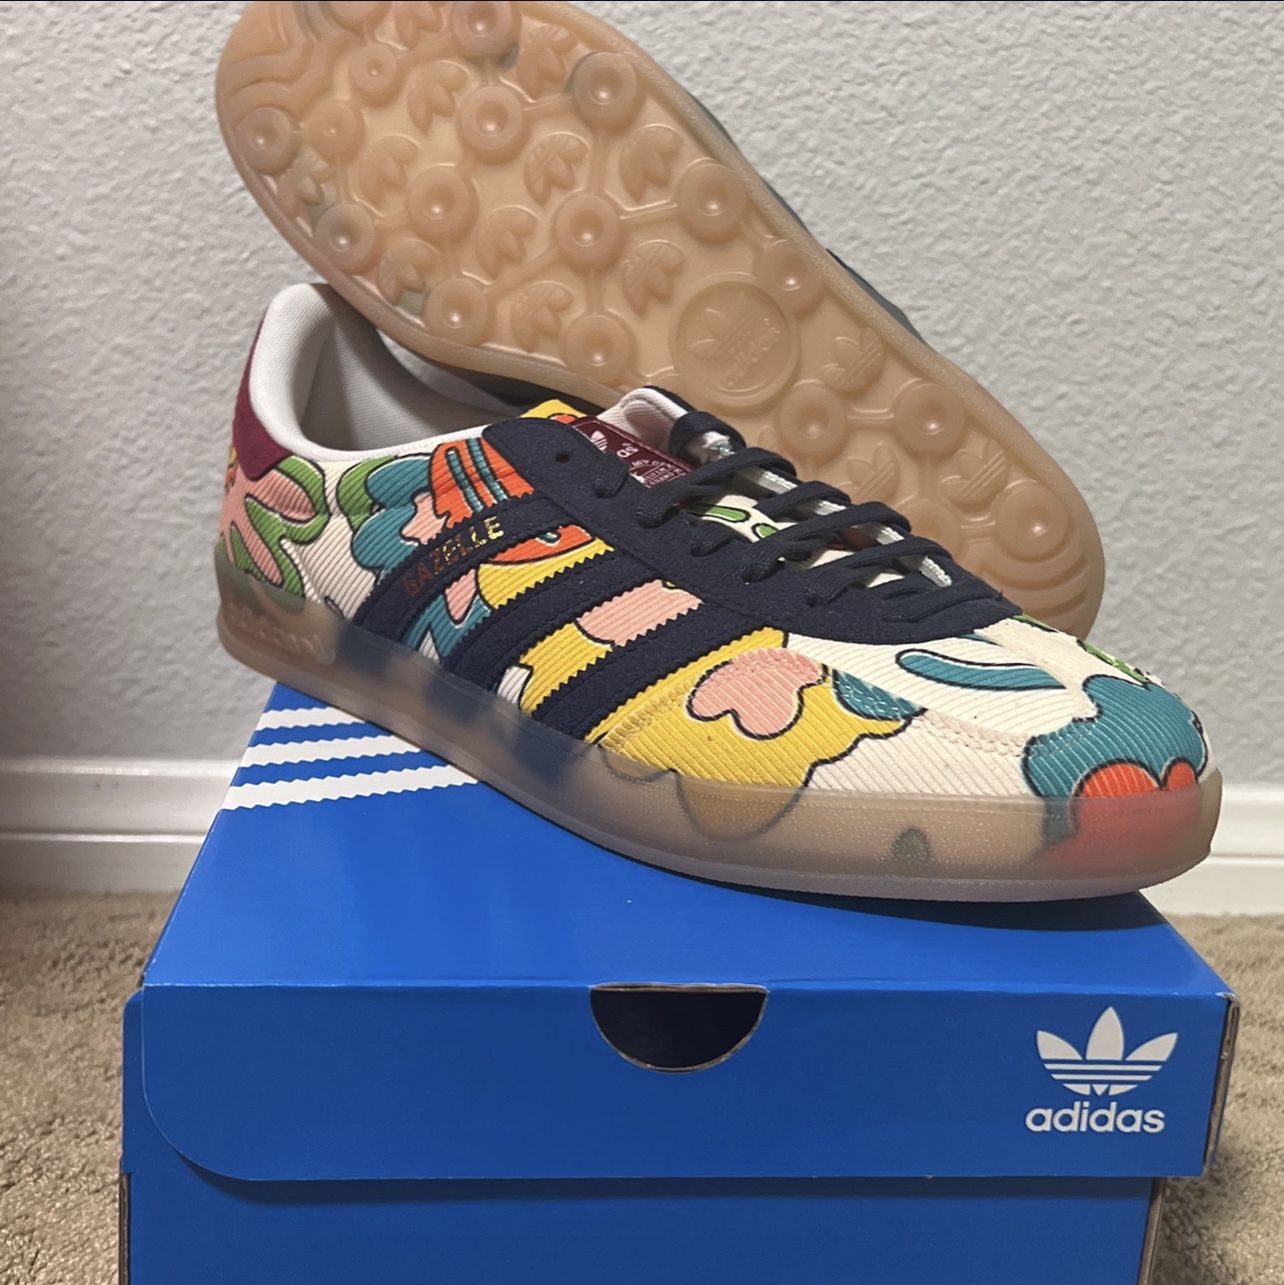 Adidas Wotherspoon Indoor 10 for Sale in Phillips Ranch, CA - OfferUp